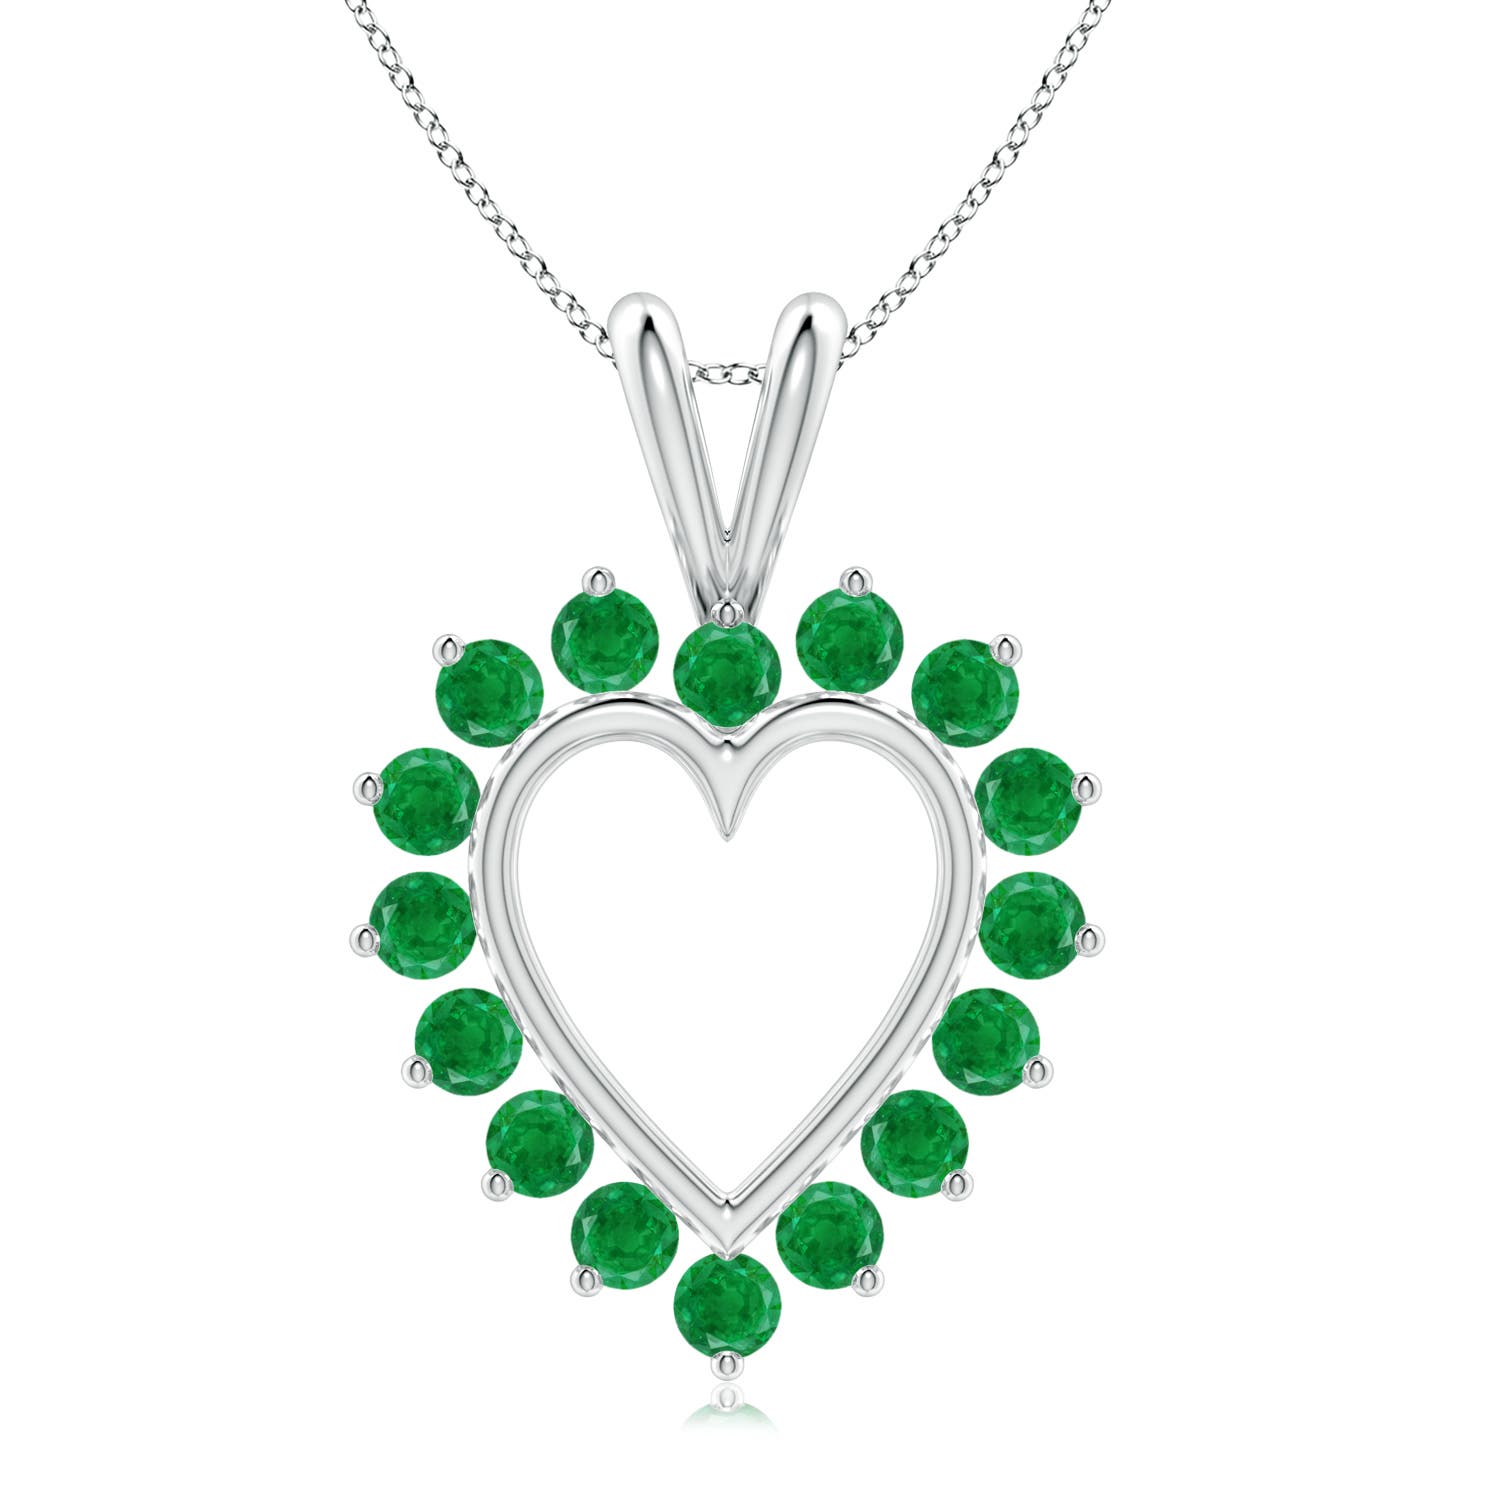 AA - Emerald / 0.72 CT / 14 KT White Gold